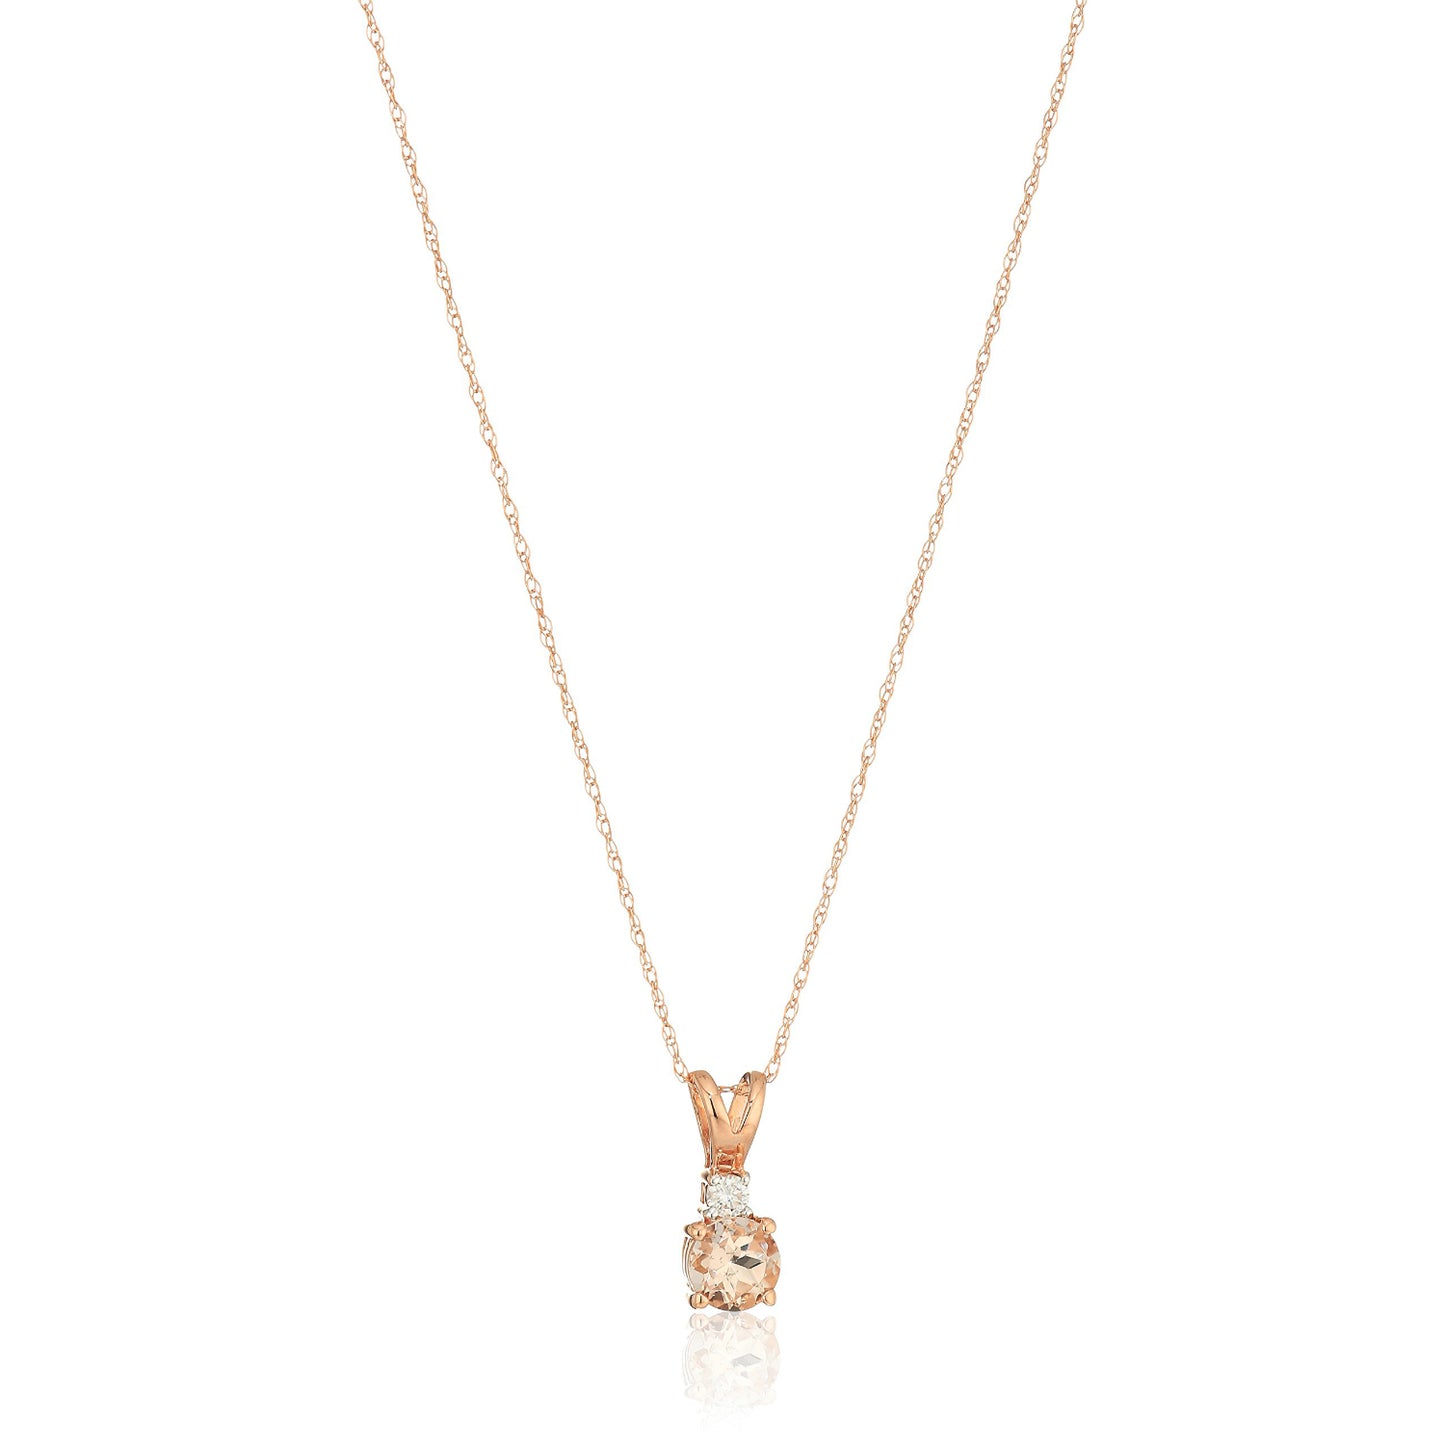 10k Rose Gold Morganite and Diamond Solitaire Pendant Necklace, 18" - Pinctore